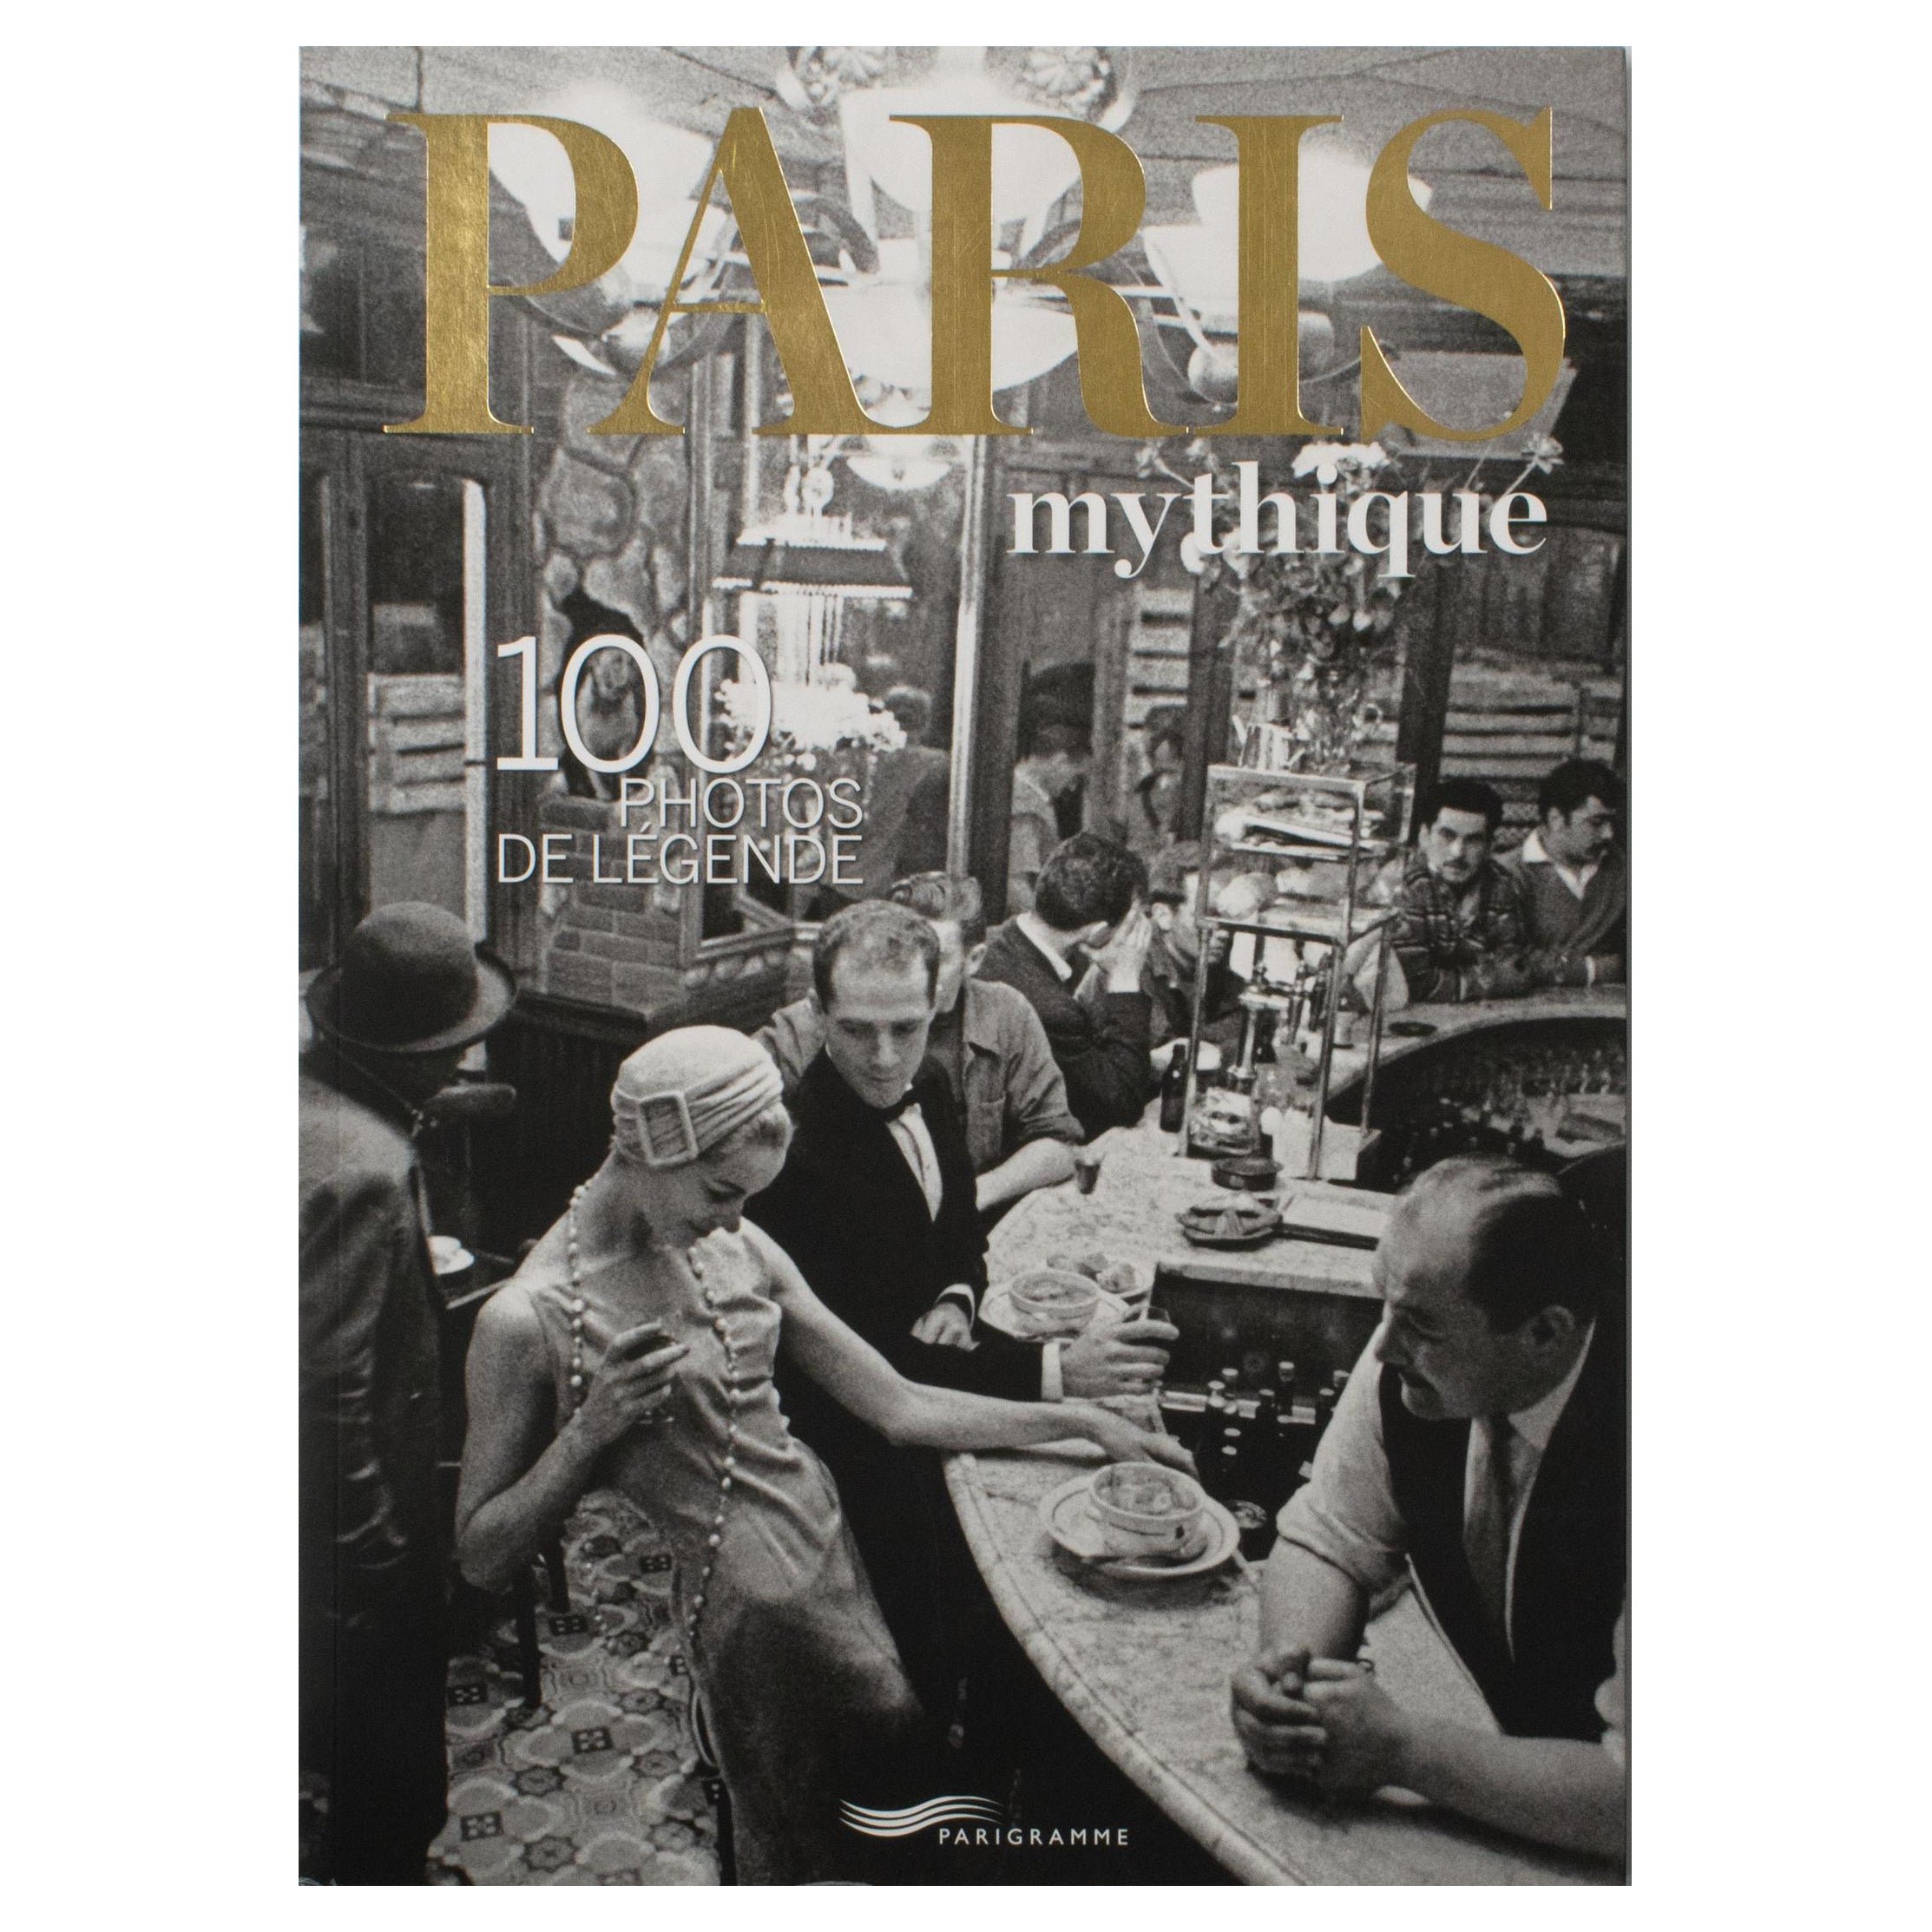 Paris Mythique, Mythical Paris, French-English Book by Parigramme, 2013